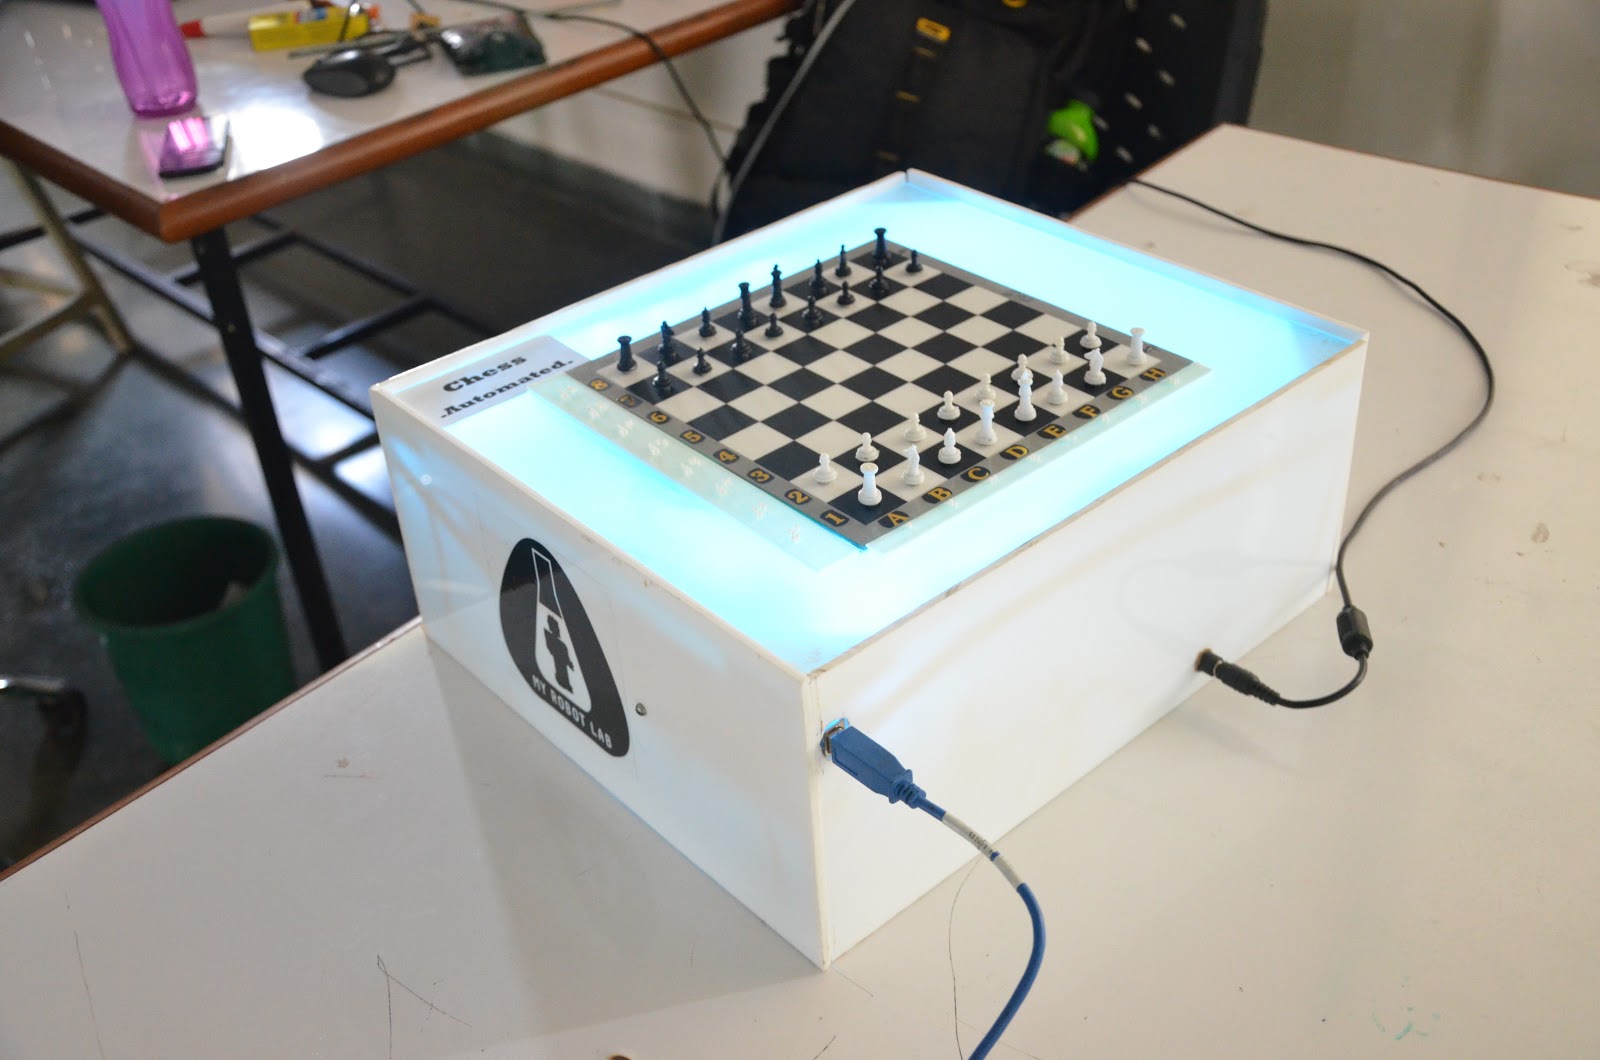 Arduino moves chess pieces using AI